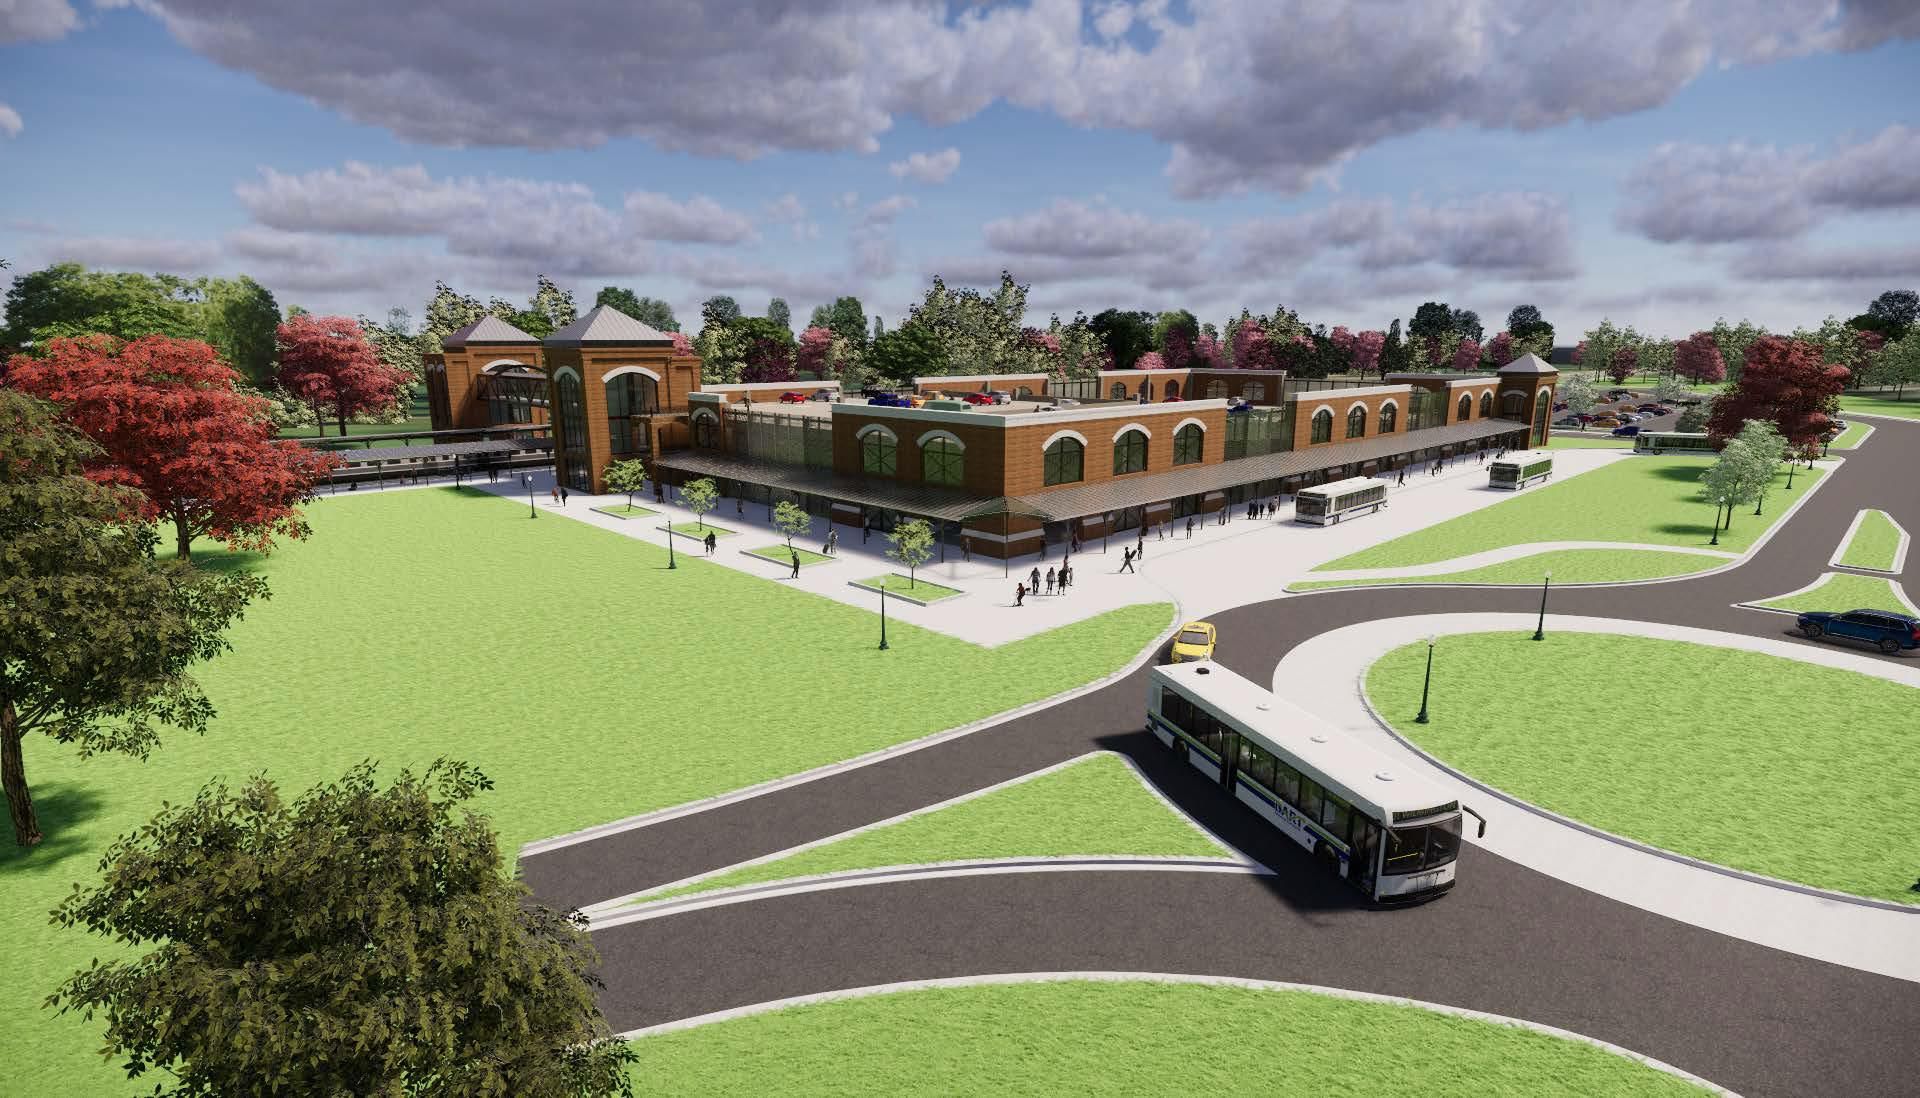 Claymont Train Station rendering Delaware business